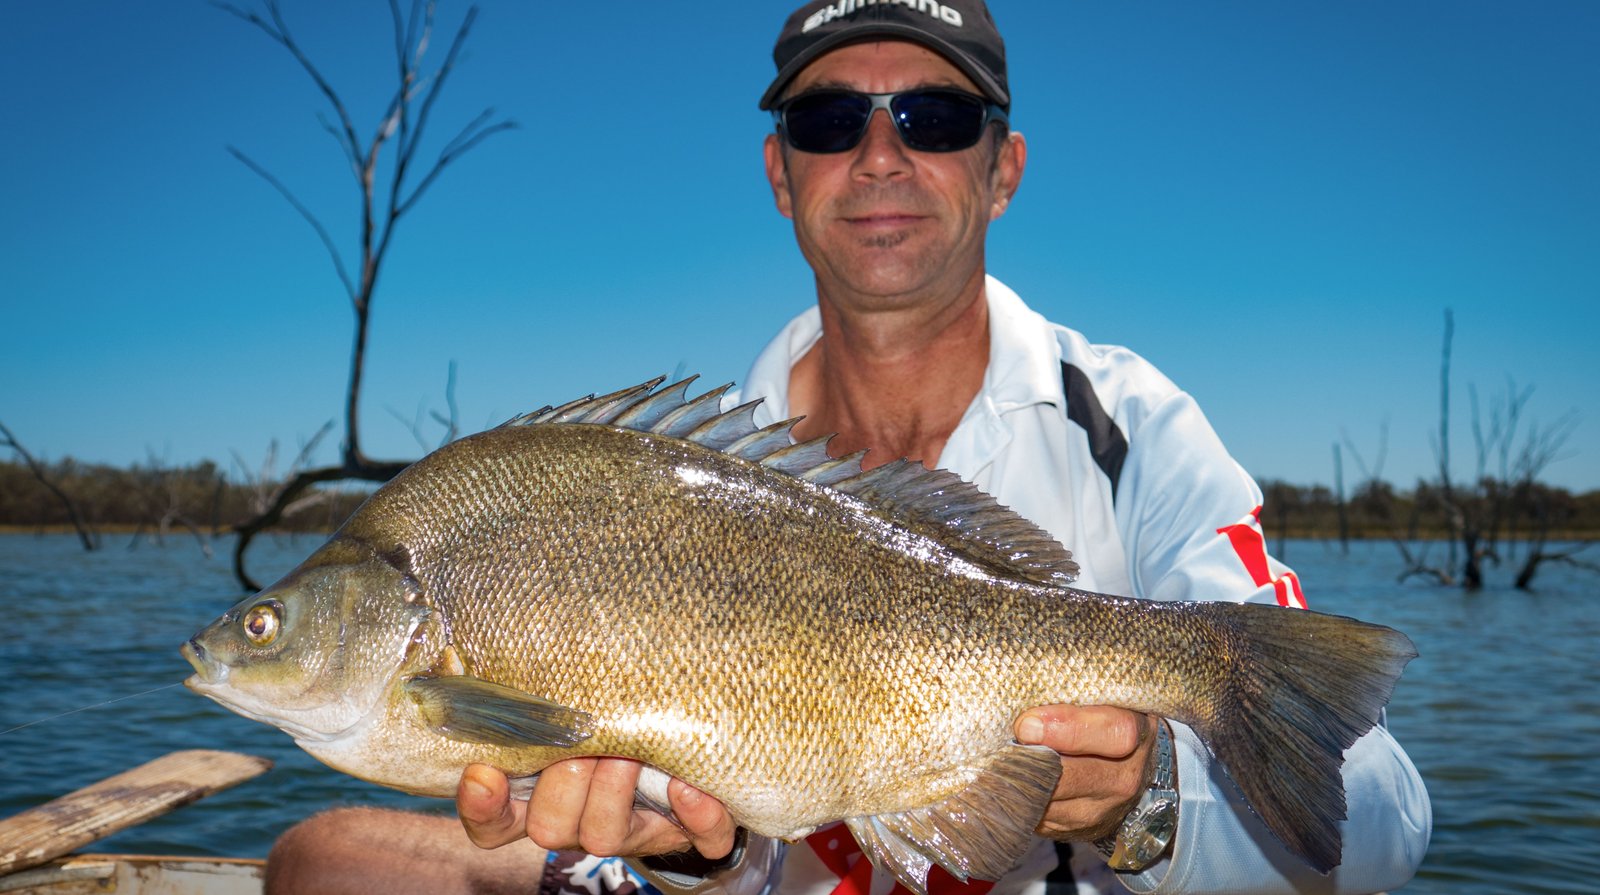 Nick Hocking with a Silver Perch